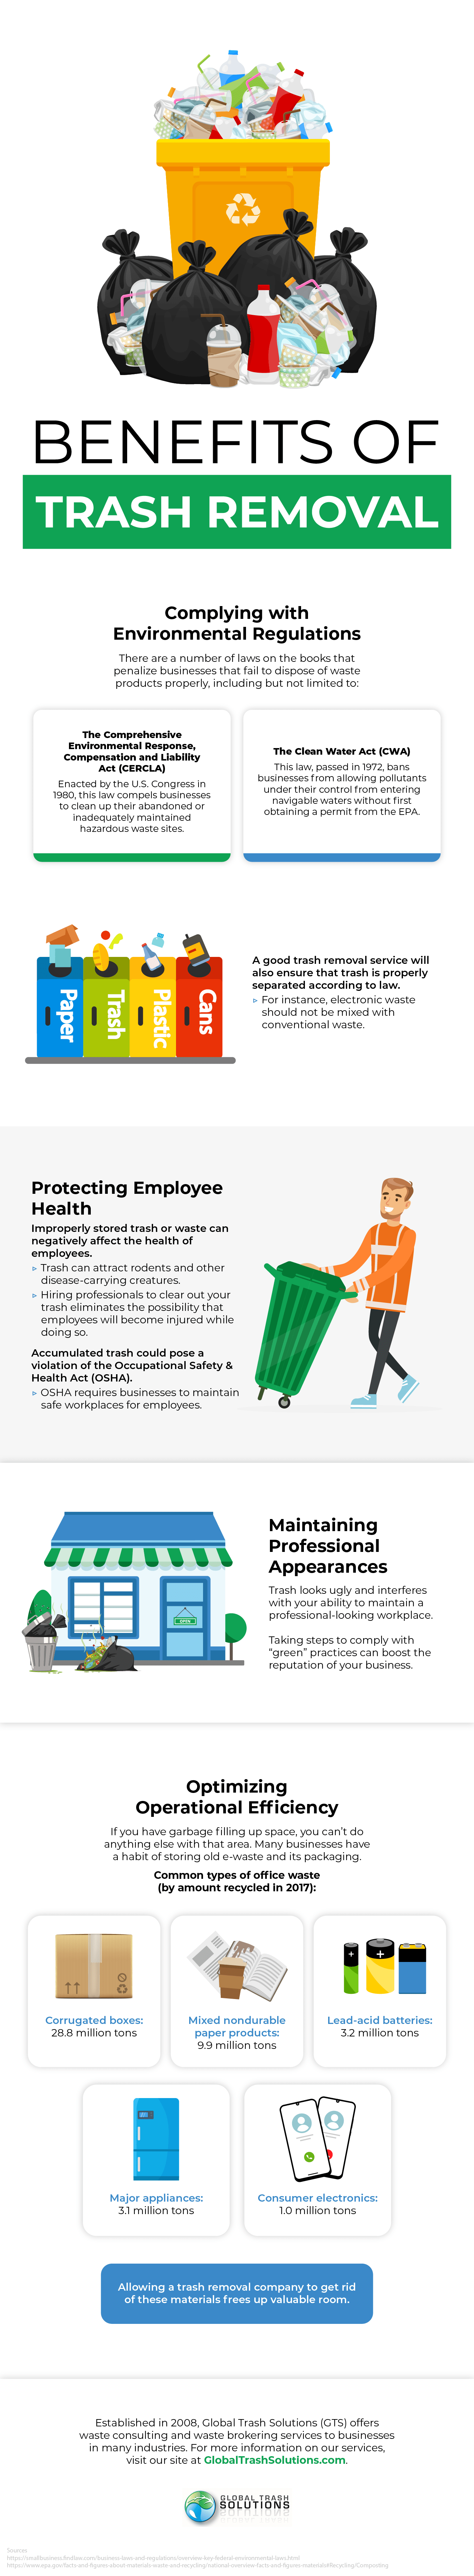 Benefits of Trash Removal Infographic